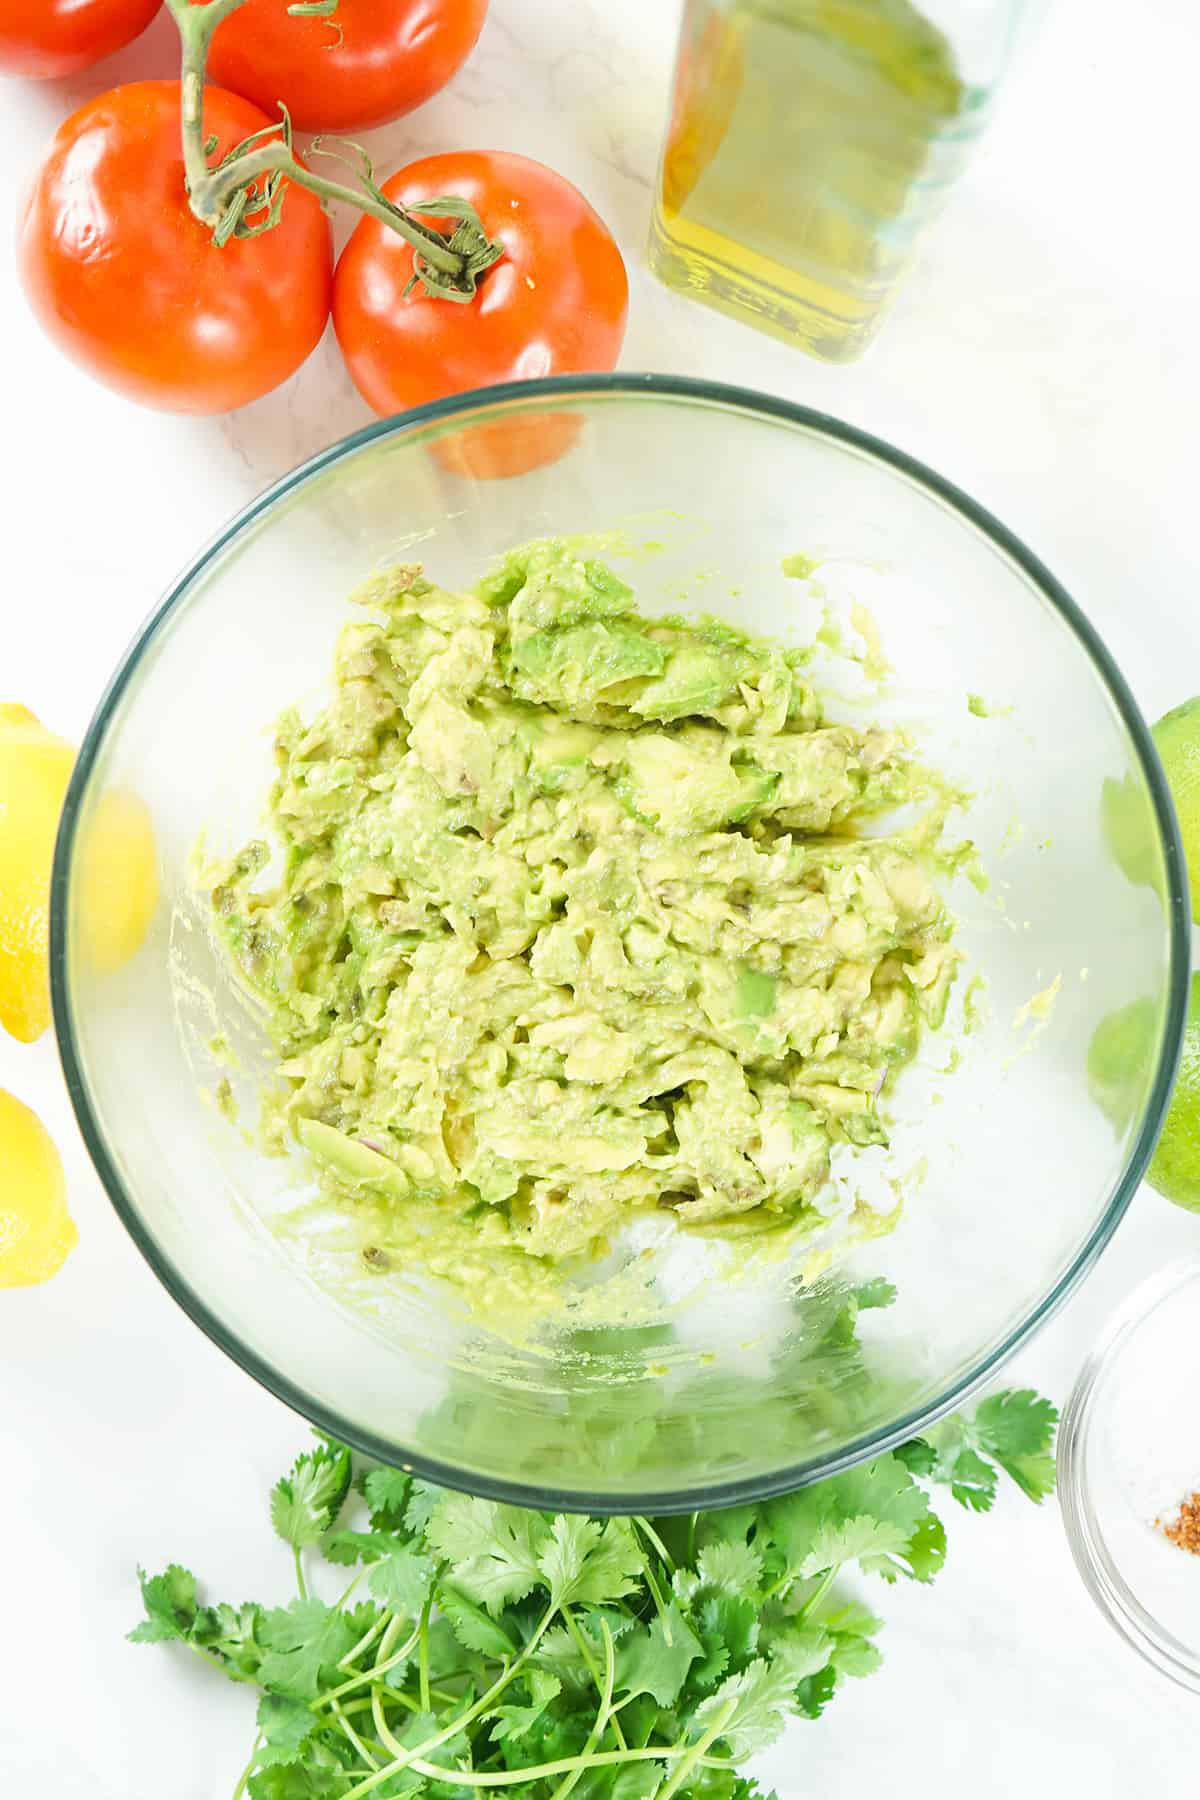 Mashed avocado in a mixing bowl.